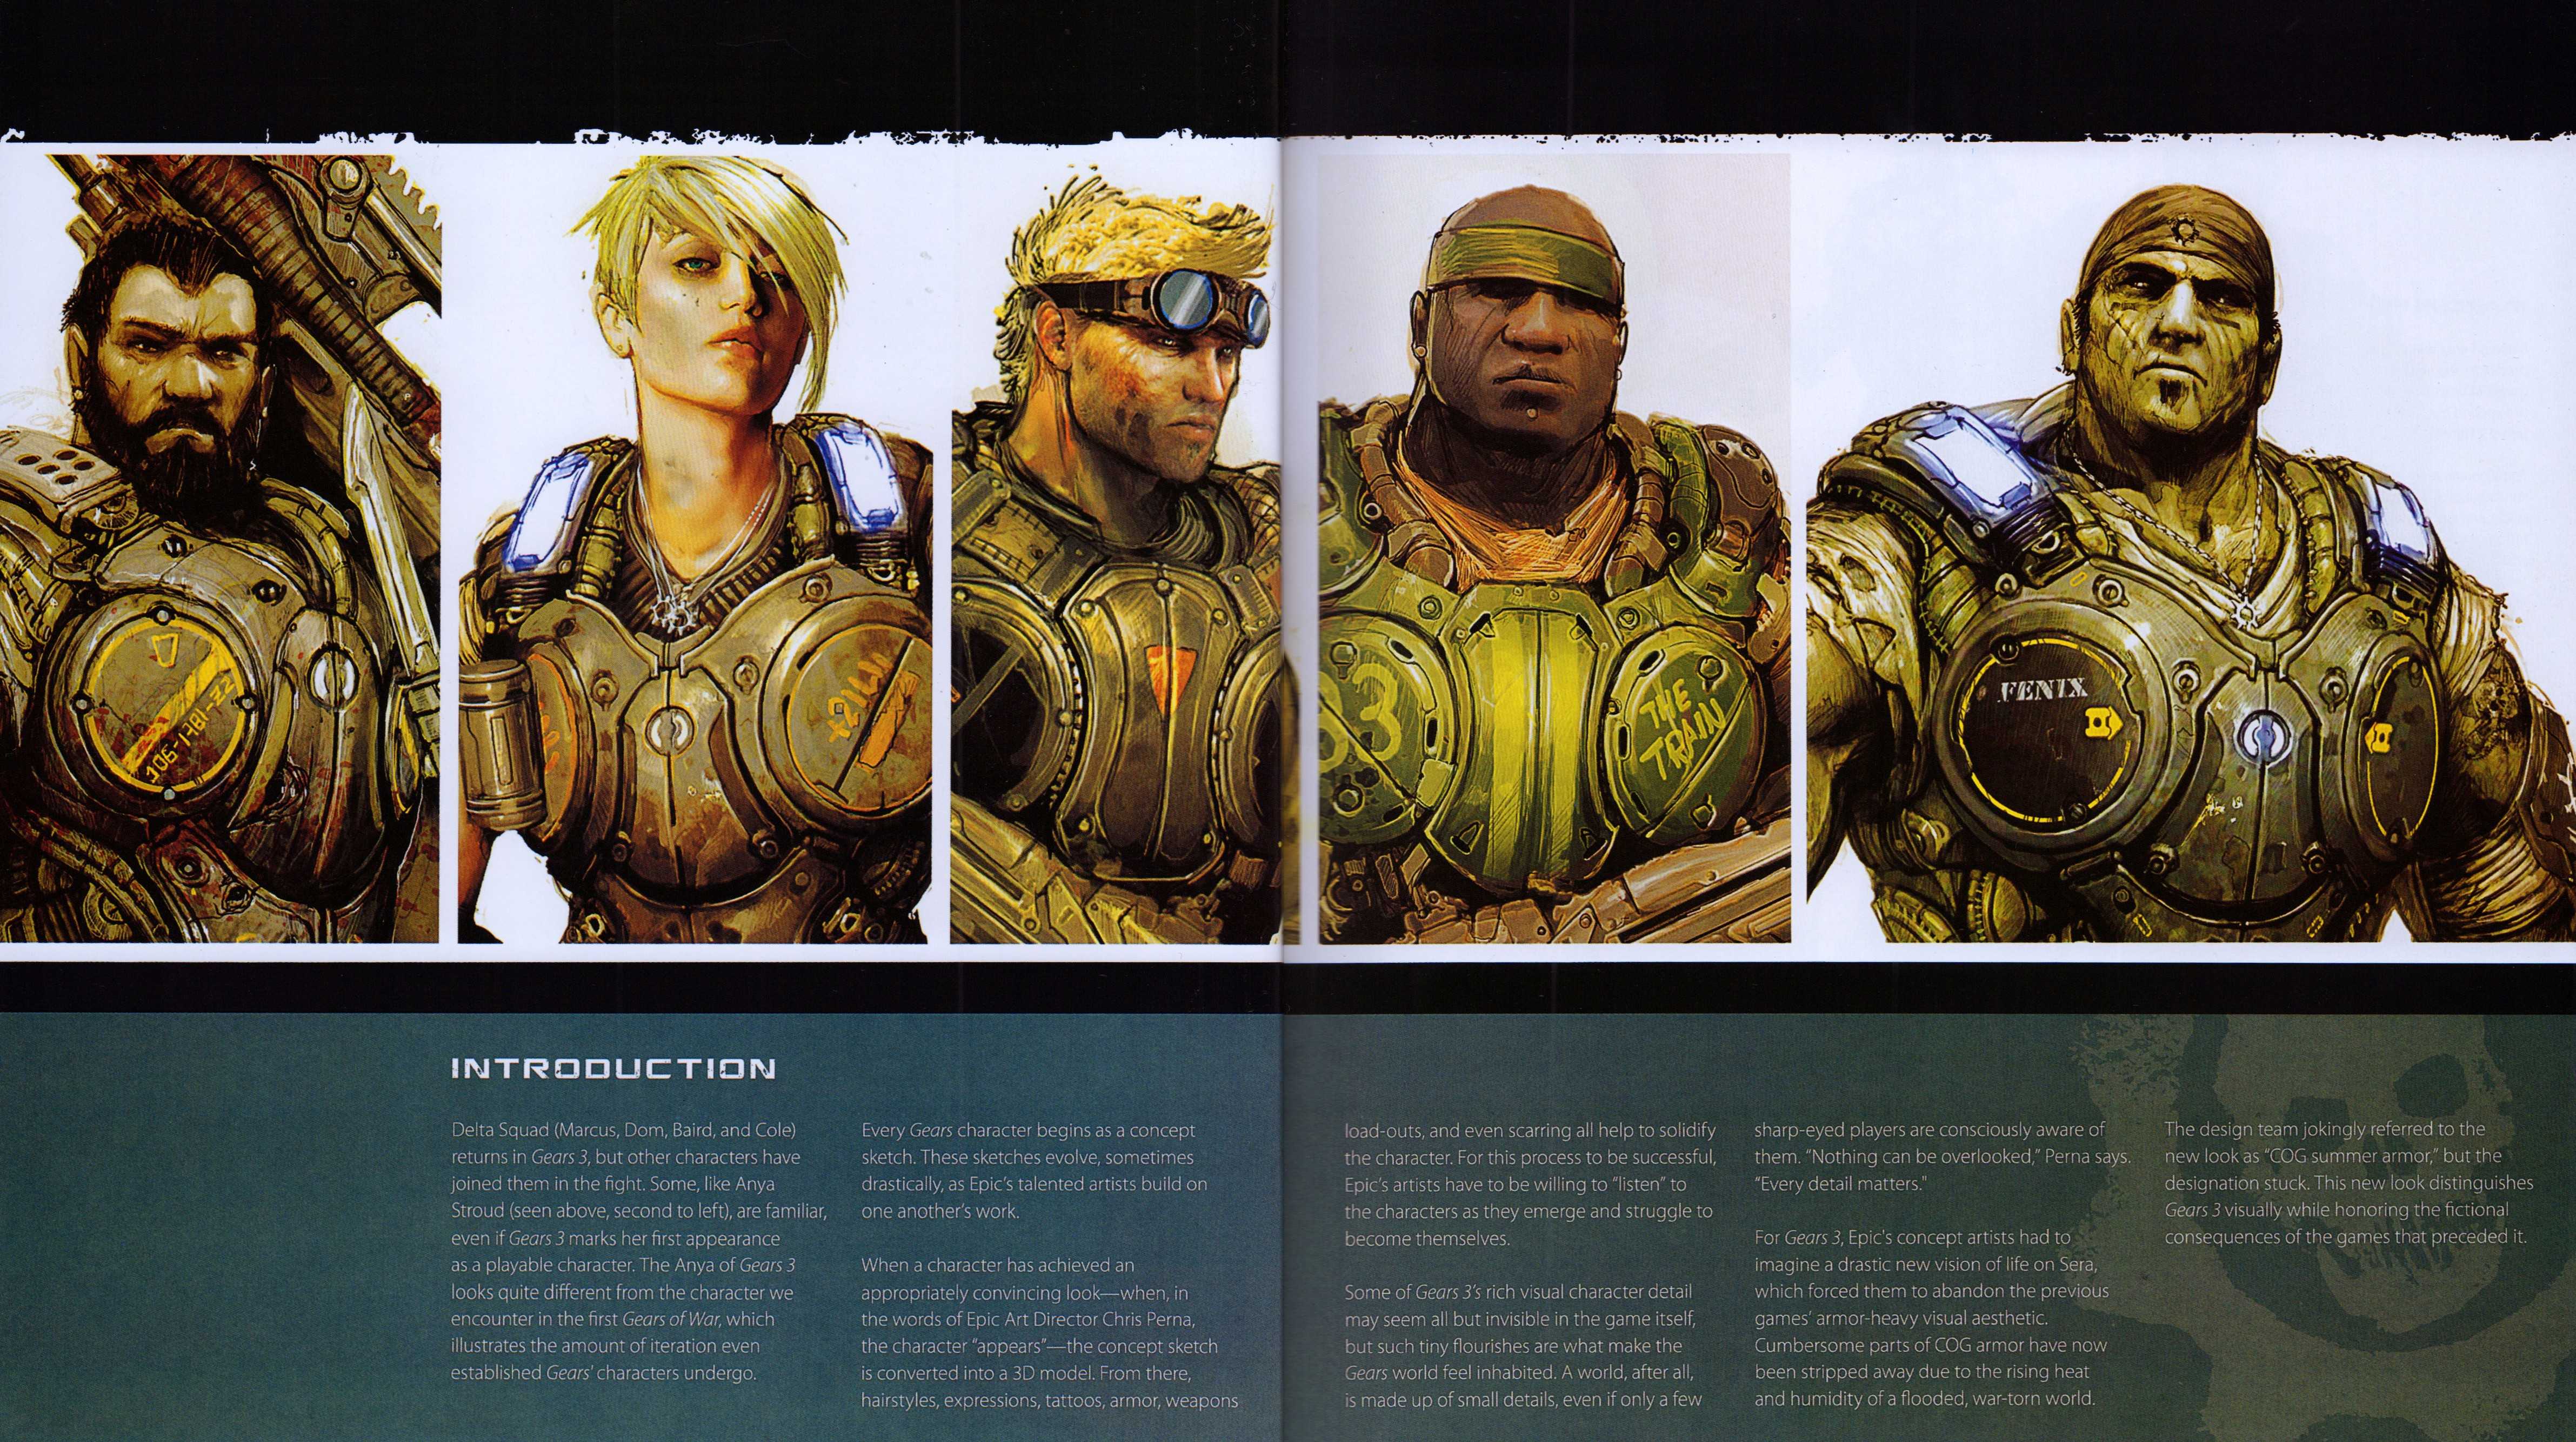 Gears of war 3 Characters 